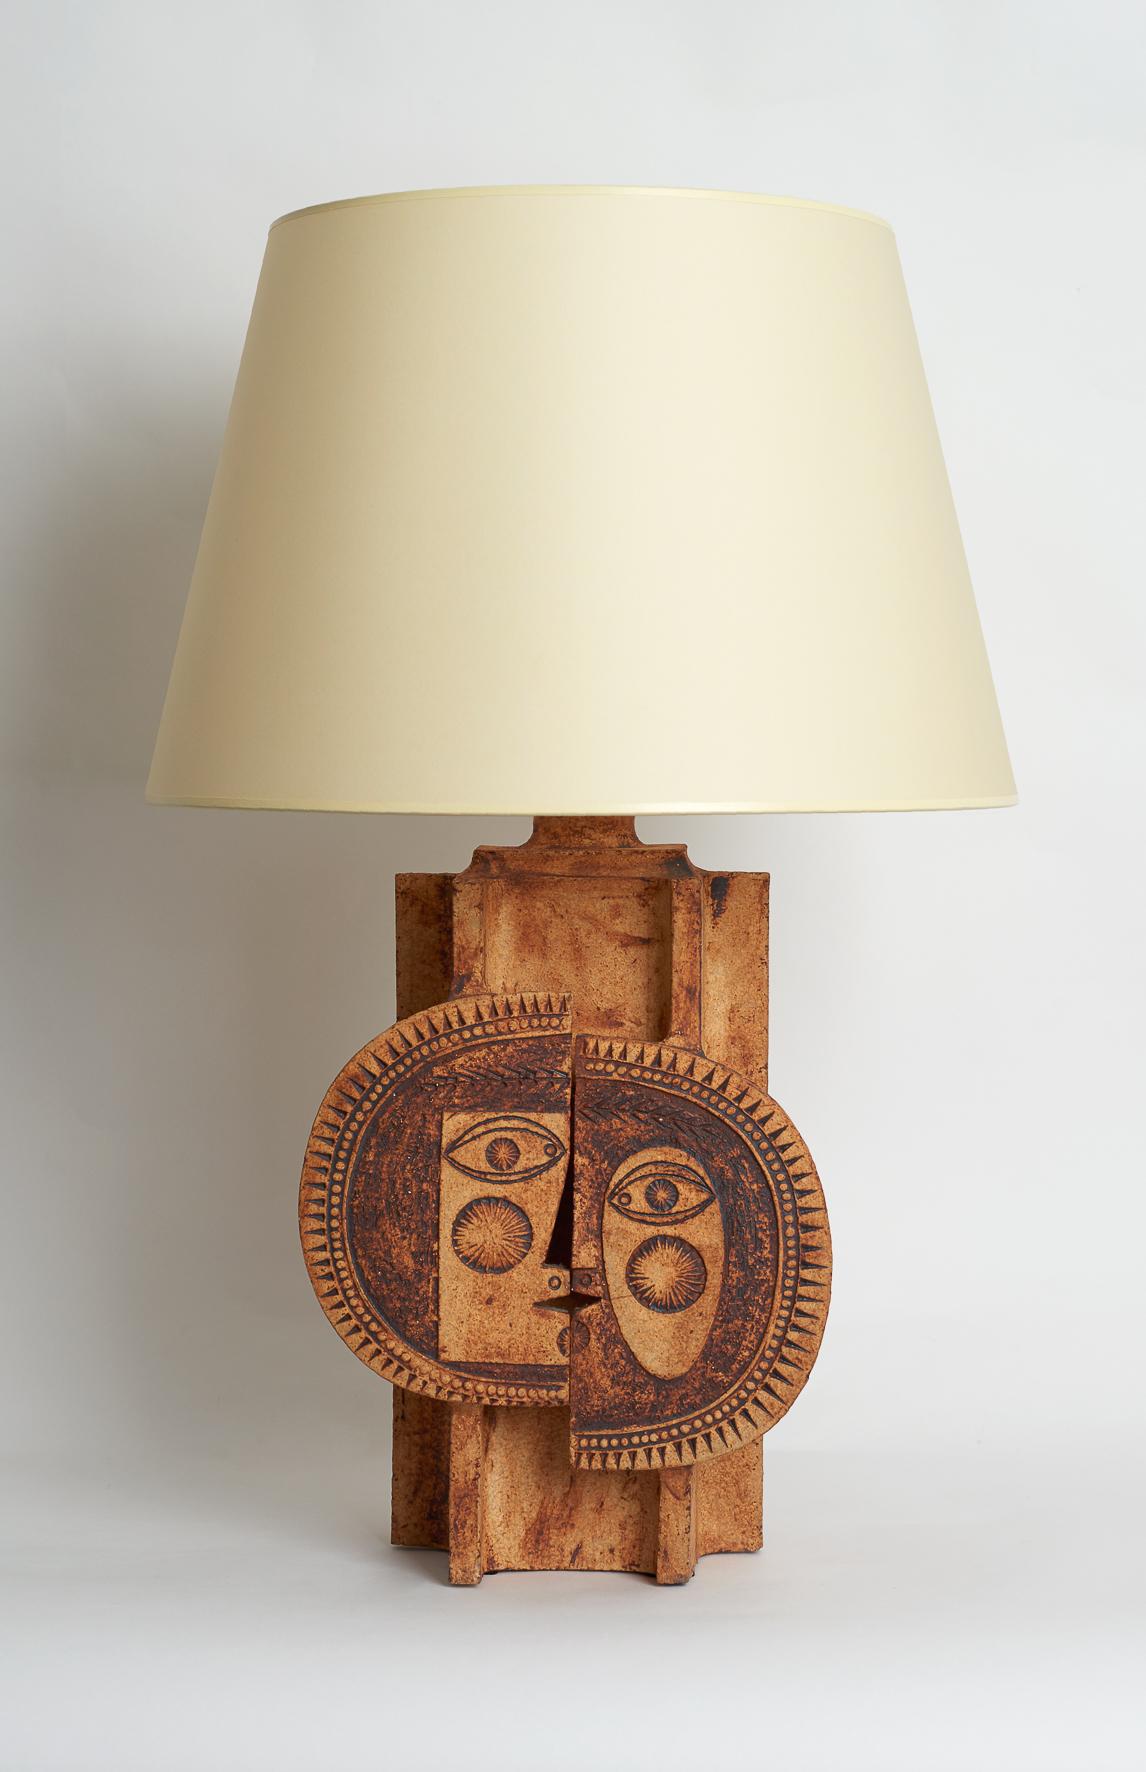 Iconic earthenware model of Table Lamp with stylized faces signed by Capron Vallauris
From 1970s

Dimensions : 
W 26 cm X D 16 cm
H 41 cm without shade
H 68 cm with shade

Note to international purchasers: 
Before using, our international